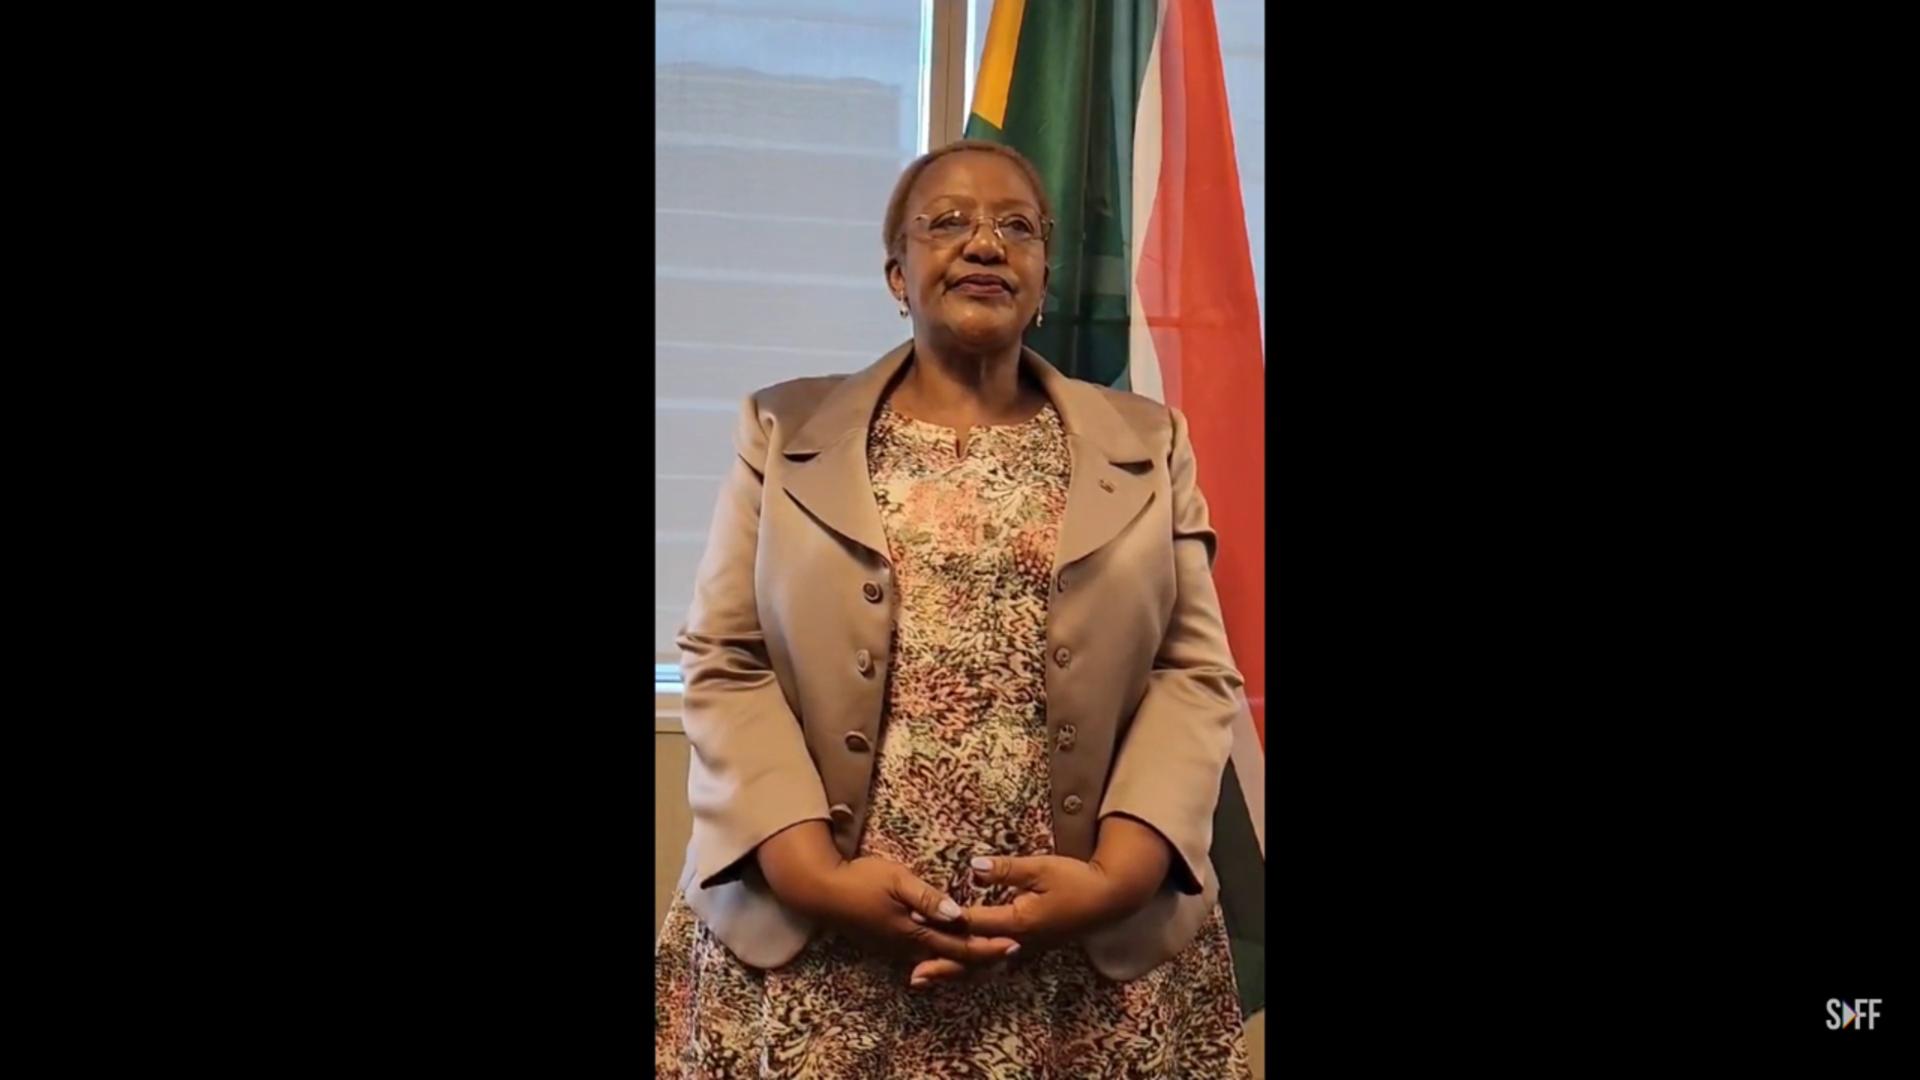 A message from the Consul-General of South Africa in Canada